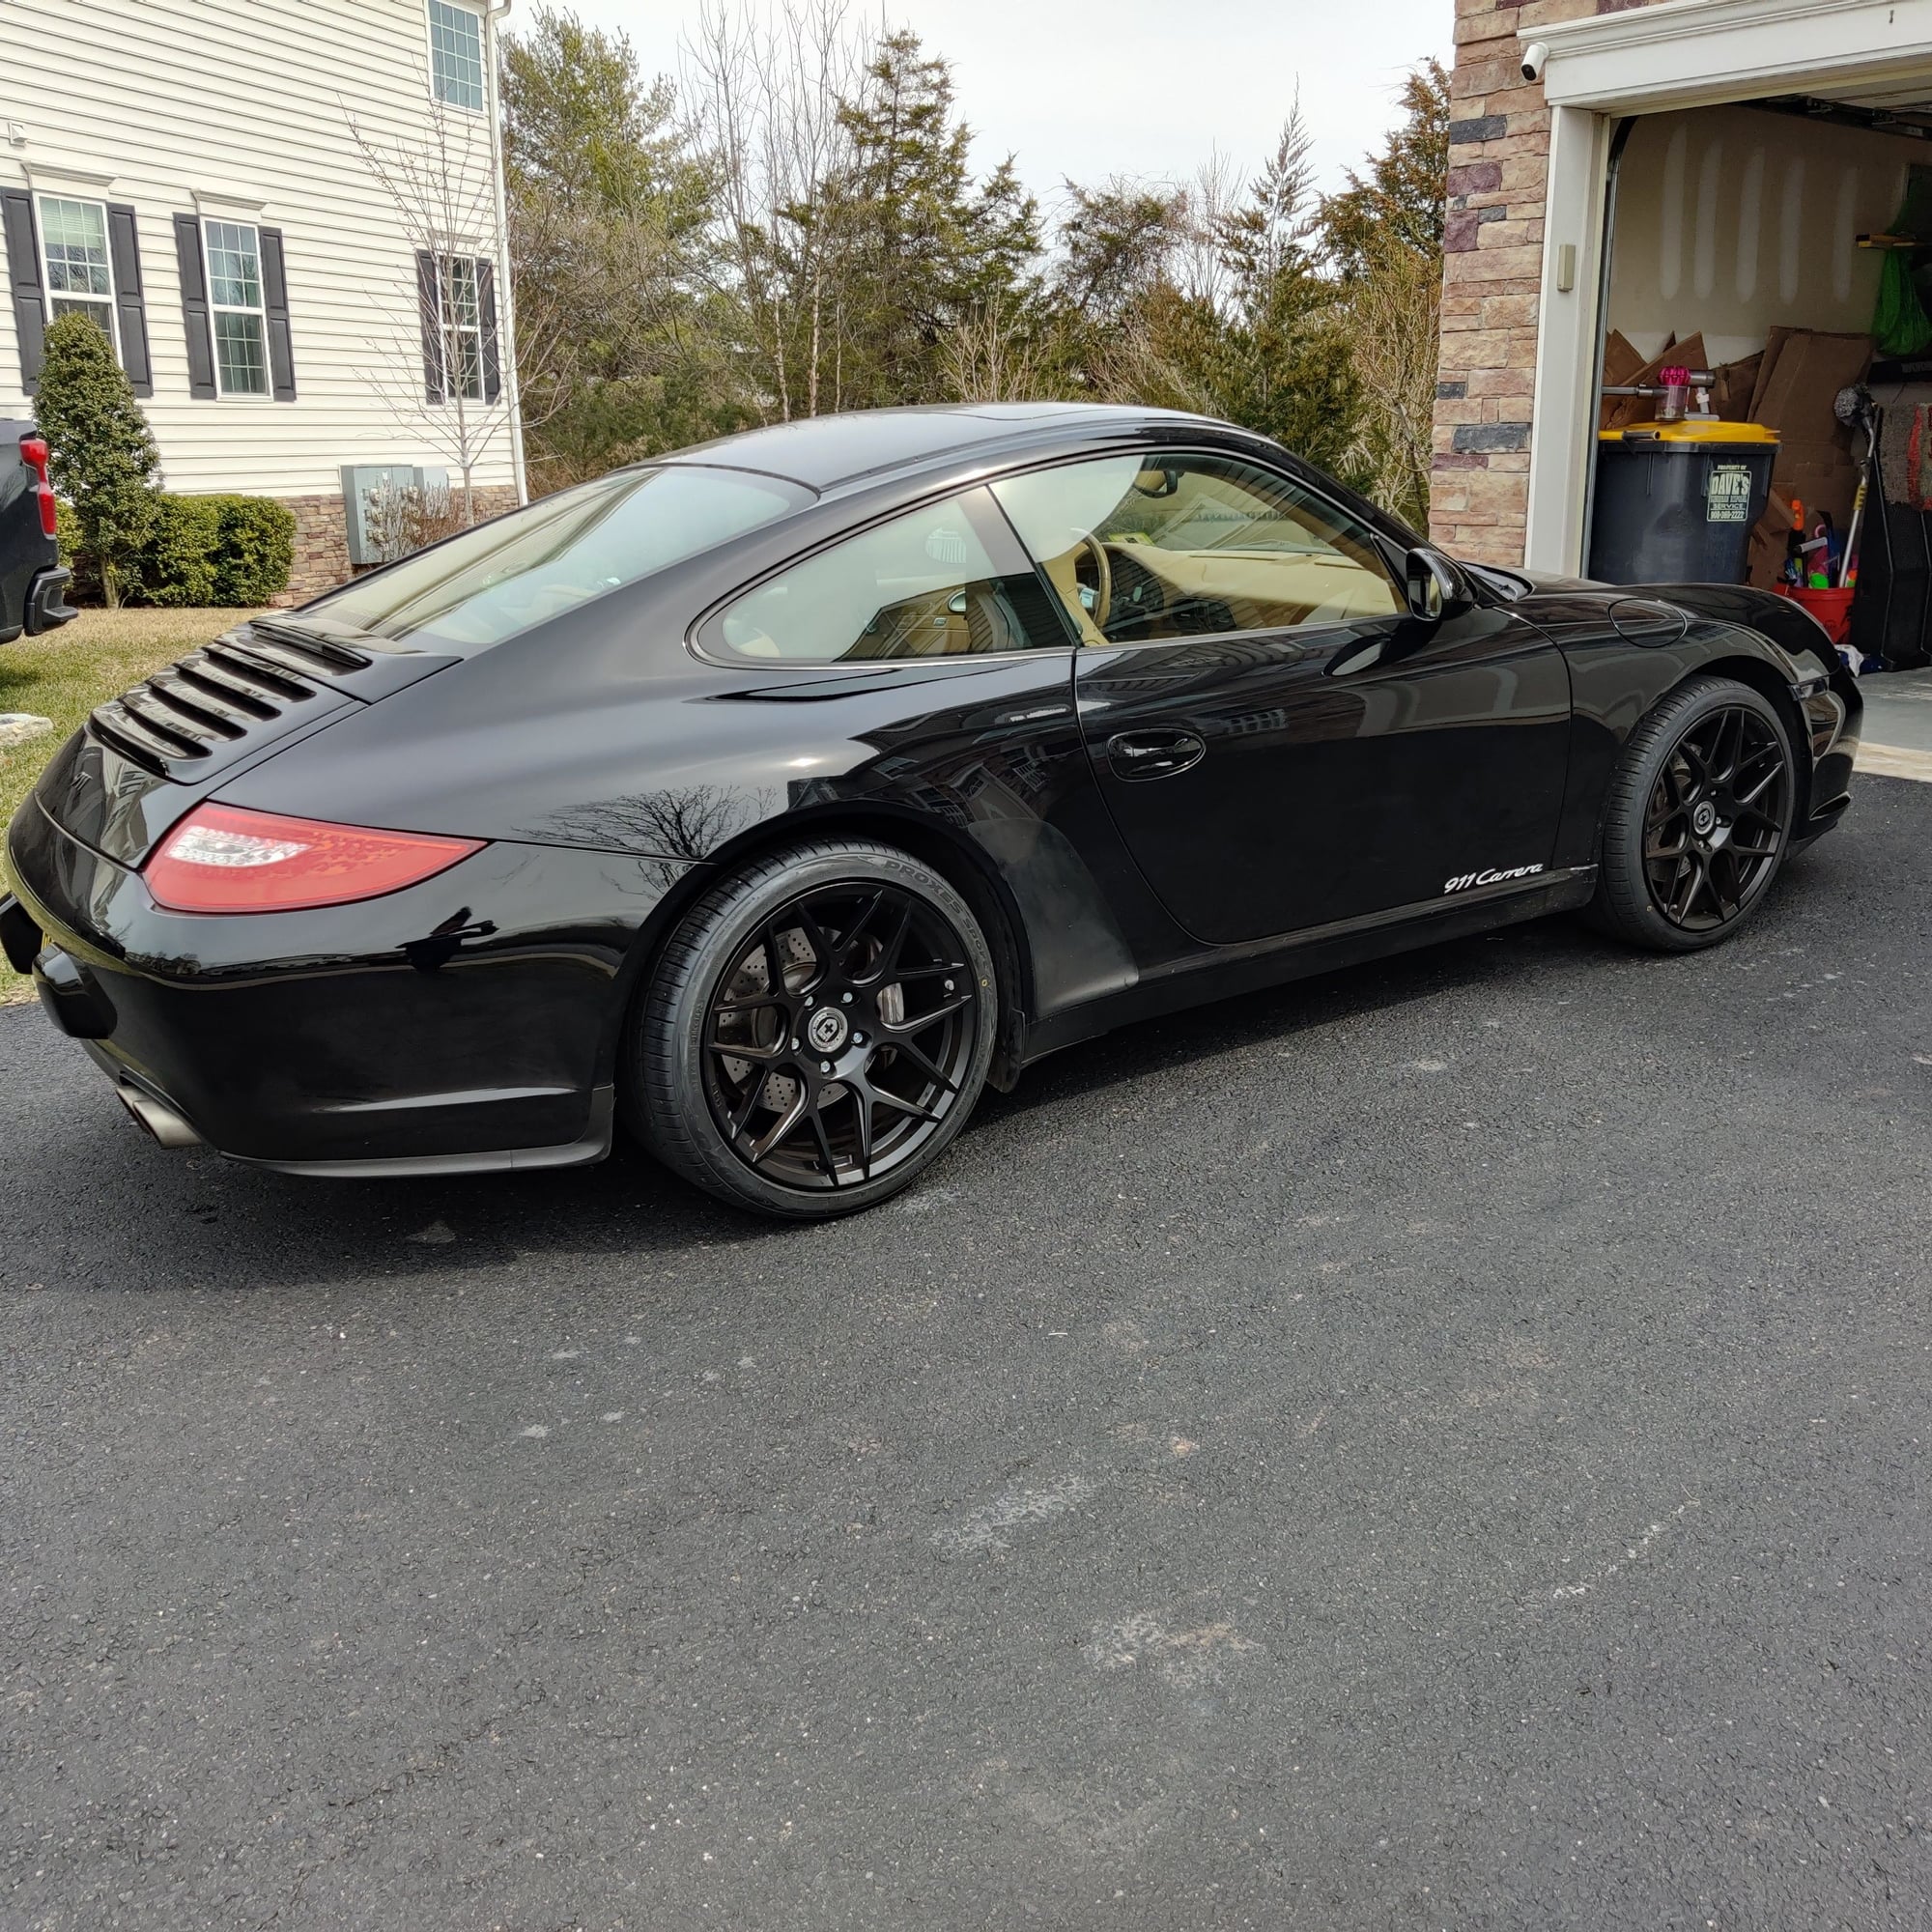 2009 Porsche 911 -  - Used - VIN WP0AA29909S706384 - 135,000 Miles - 6 cyl - 2WD - Manual - Coupe - Black - Princeton, NJ 08544, United States